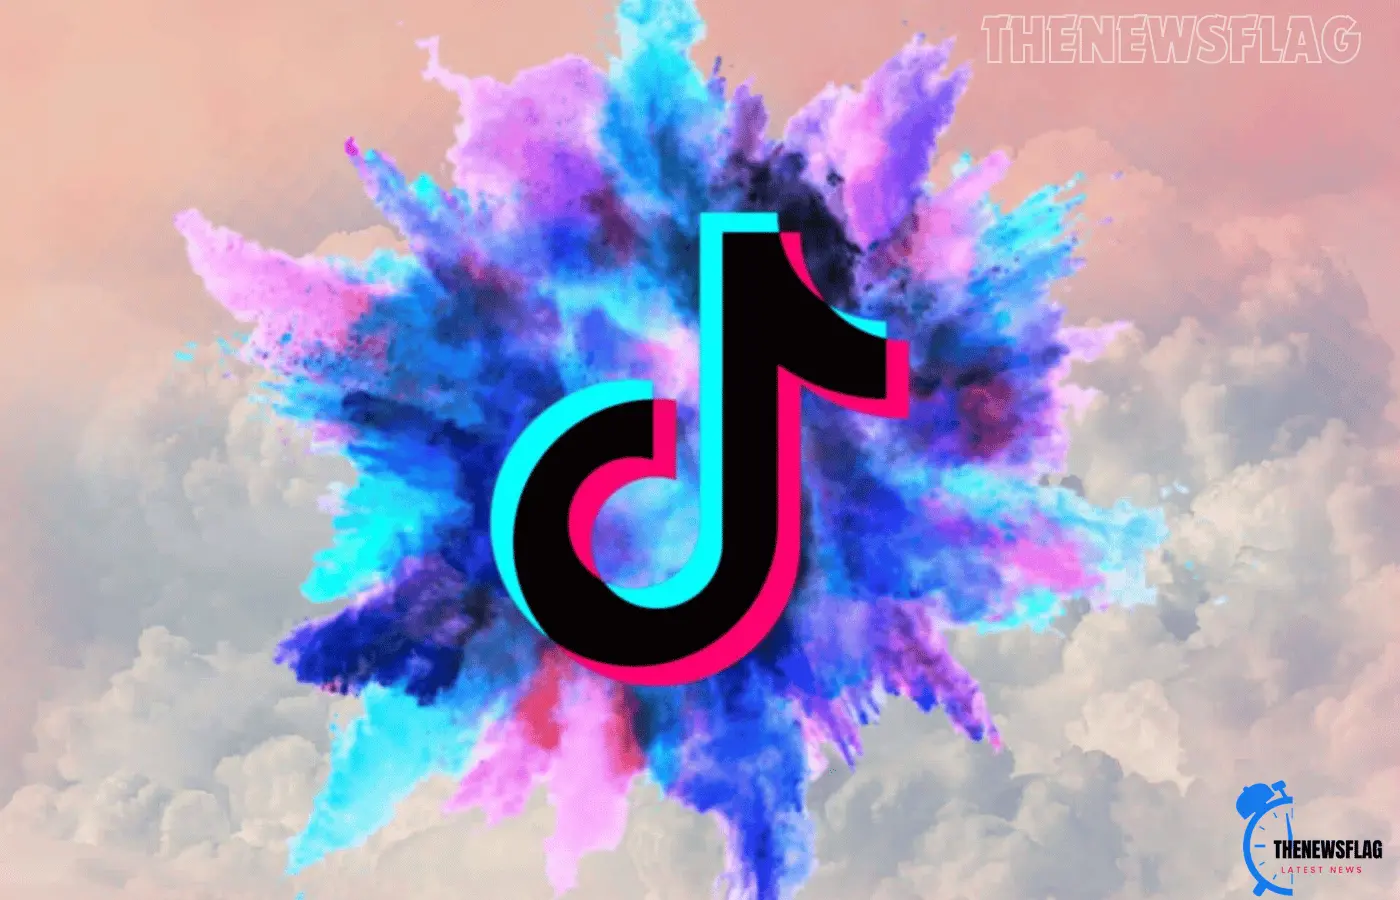 The new policy for TikTok employees: Will remove stock if you disparage the firm